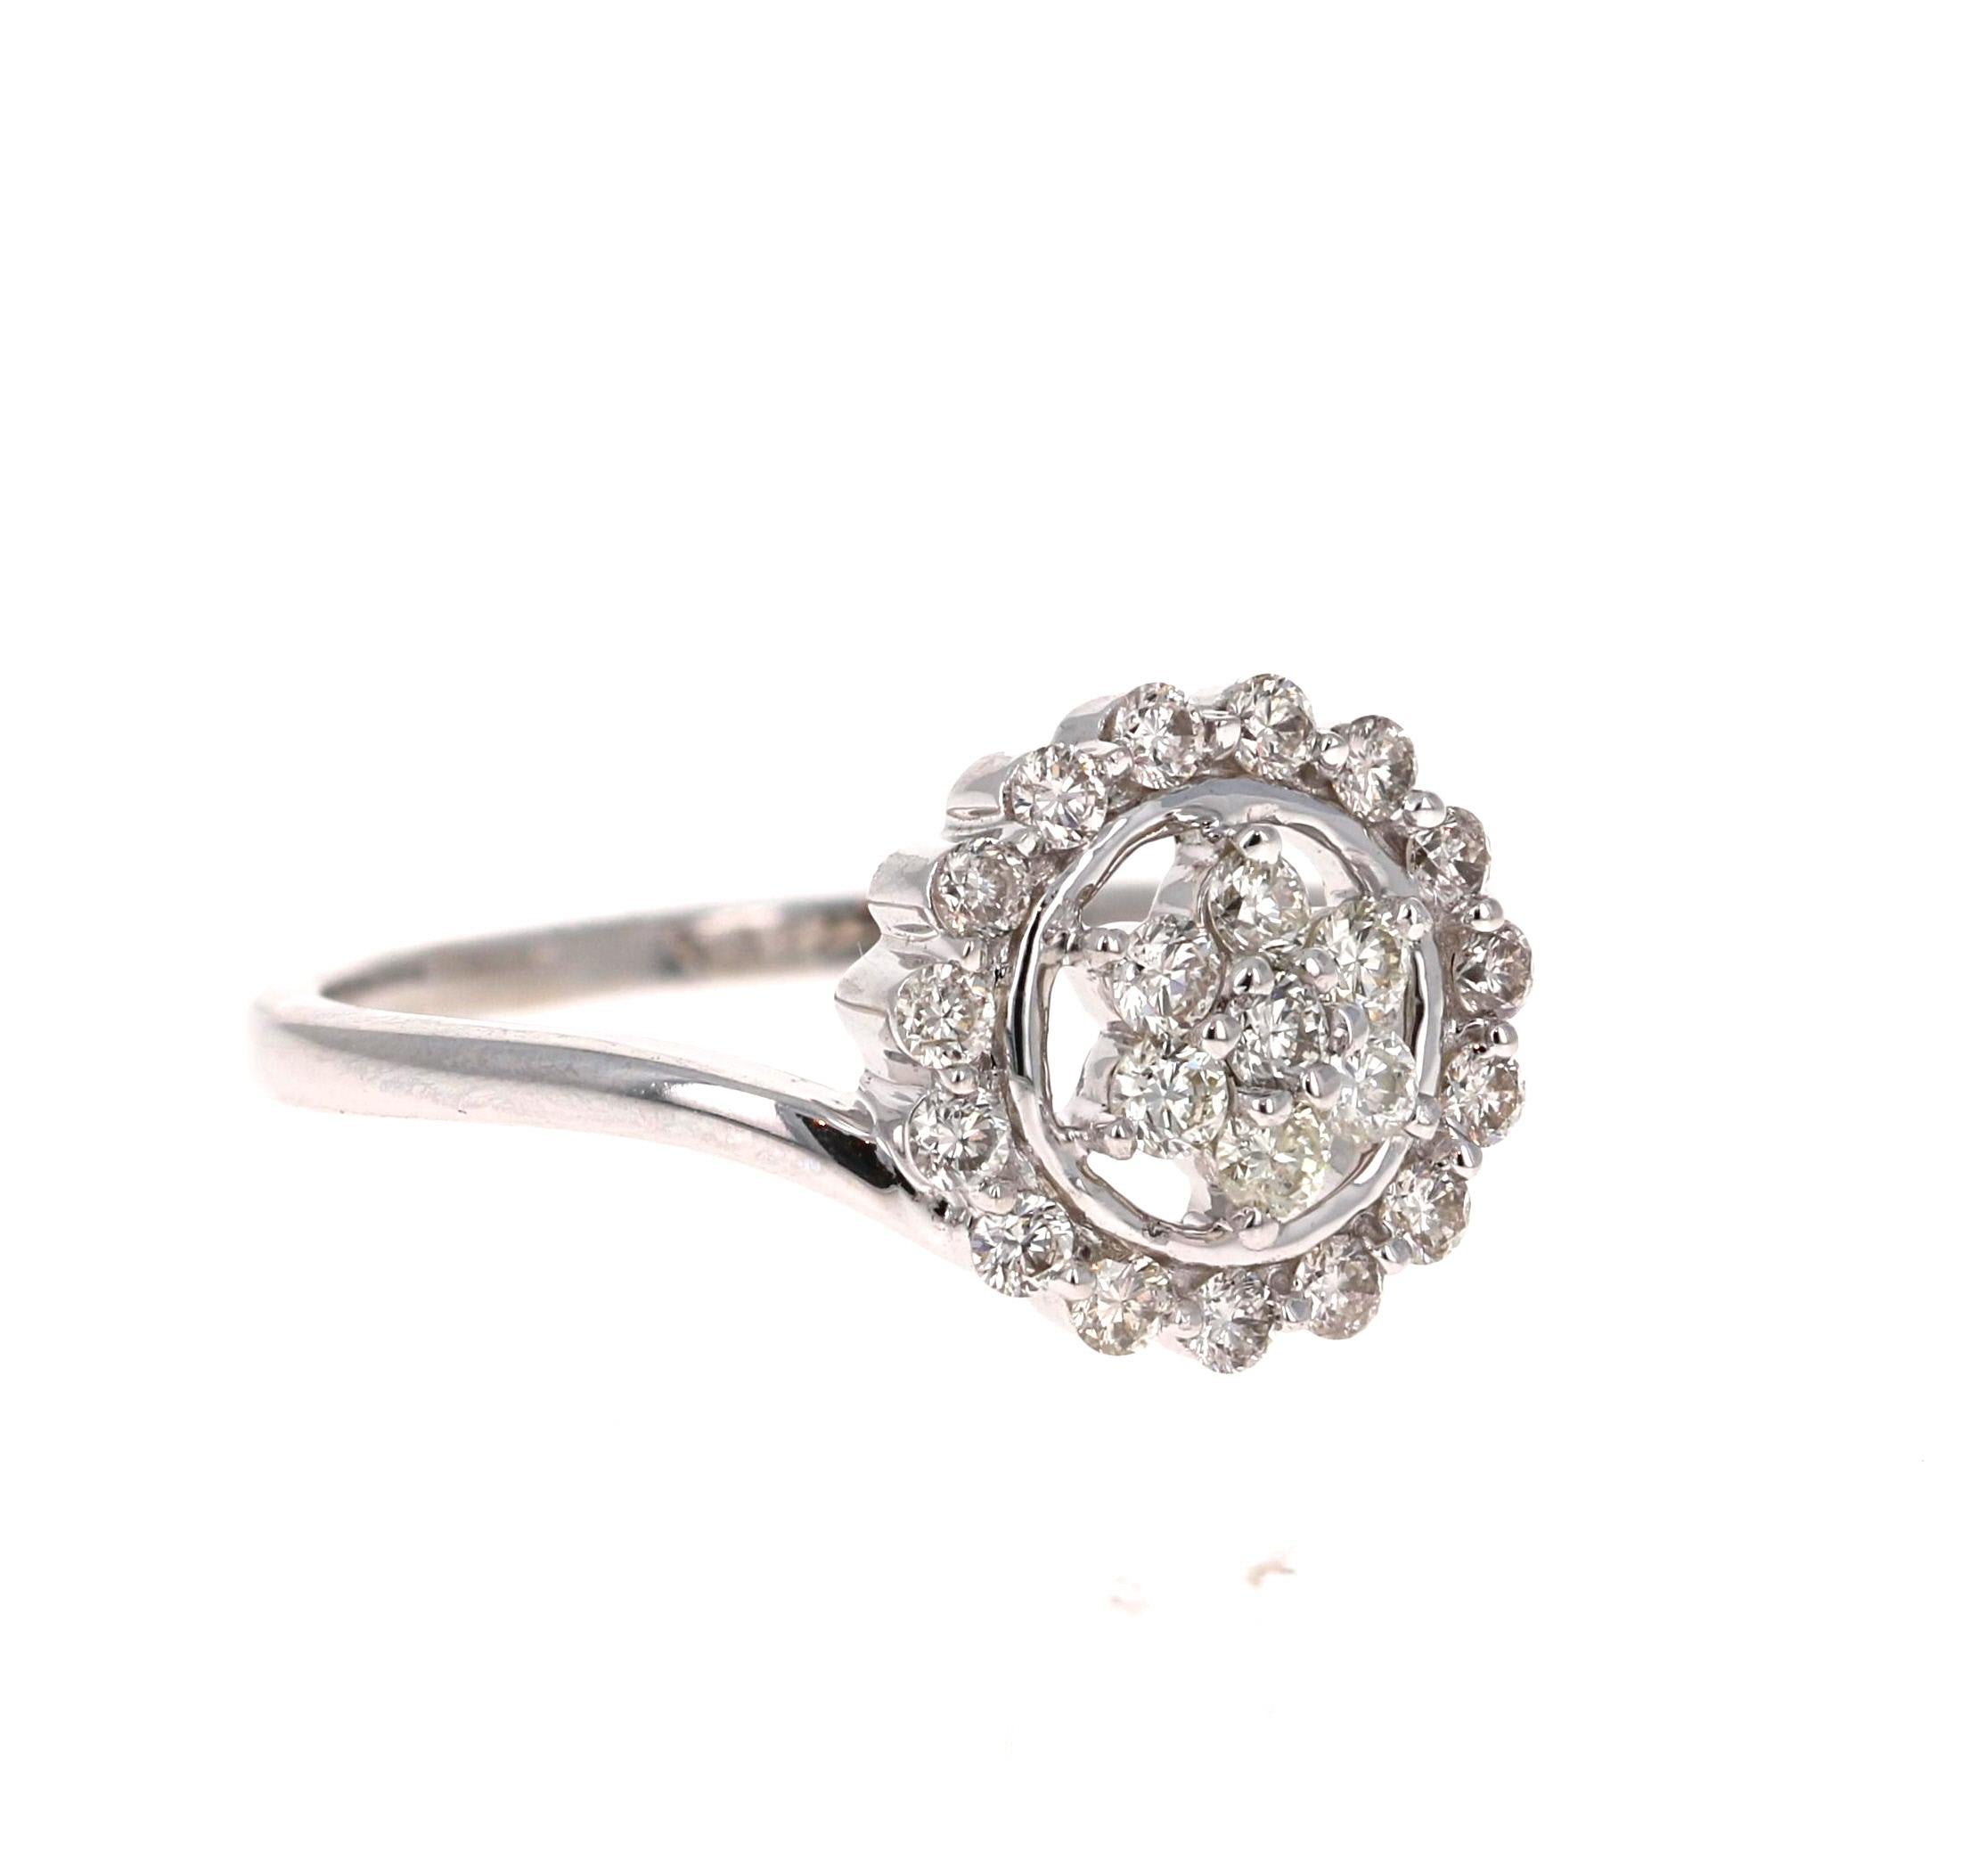 This unique Cluster ring has 22 Round Cut Diamonds that weigh 0.49 Carats.  The Cluster setting makes the center Diamond look well over a carat.   The Clarity is VS2 and the Color is H.

It is beautifully set in 14 Karat Yellow Gold and weighs